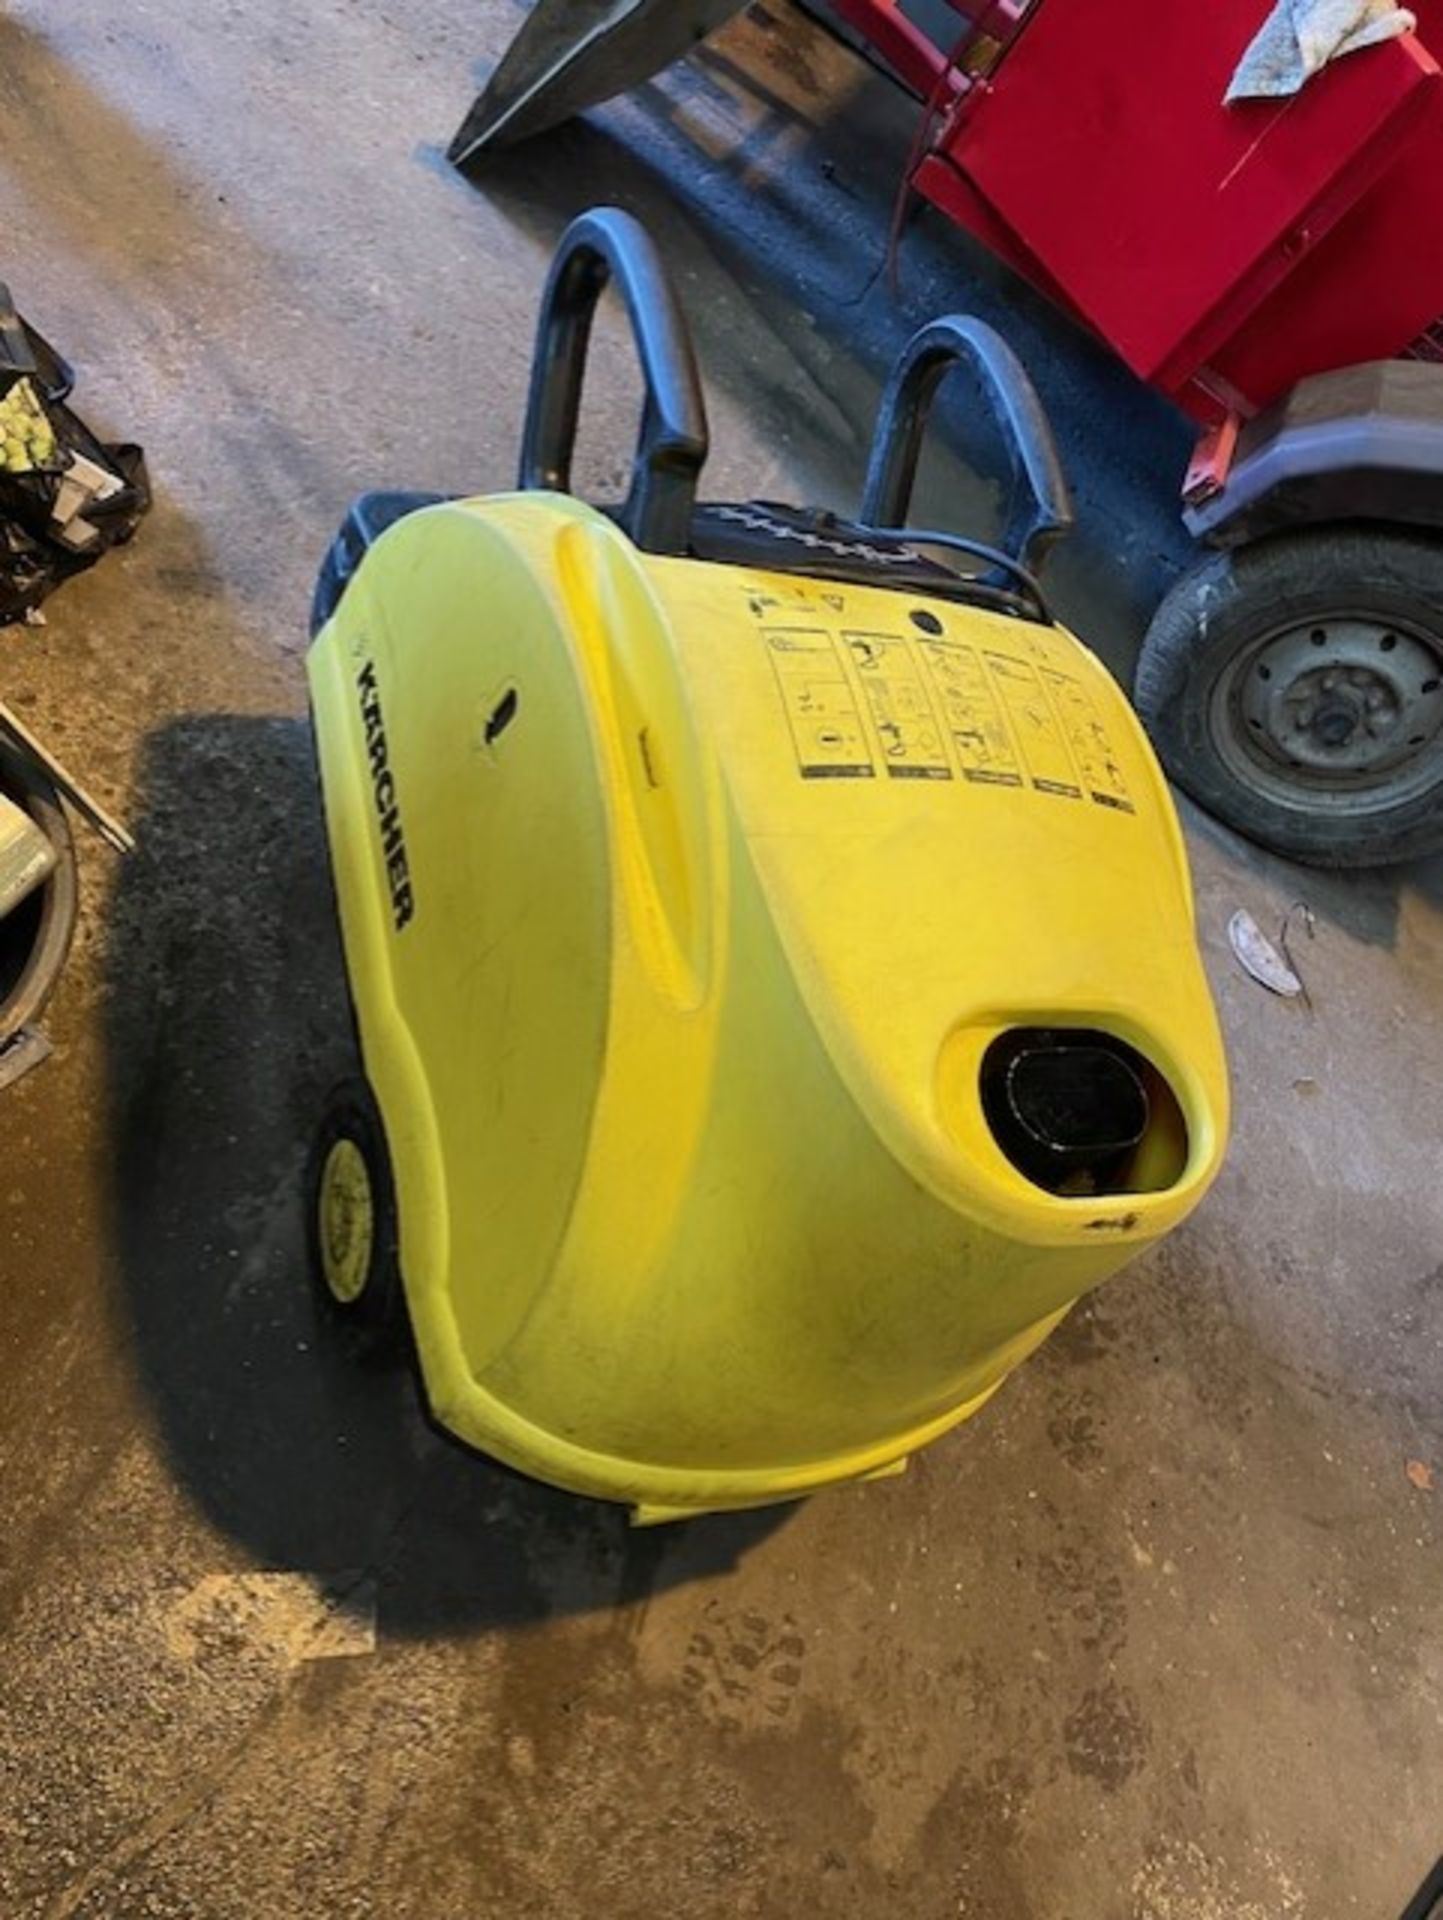 Karcher hot and cold pressure washer hds551 c model it’s in good condition still comes with hose and - Image 10 of 10